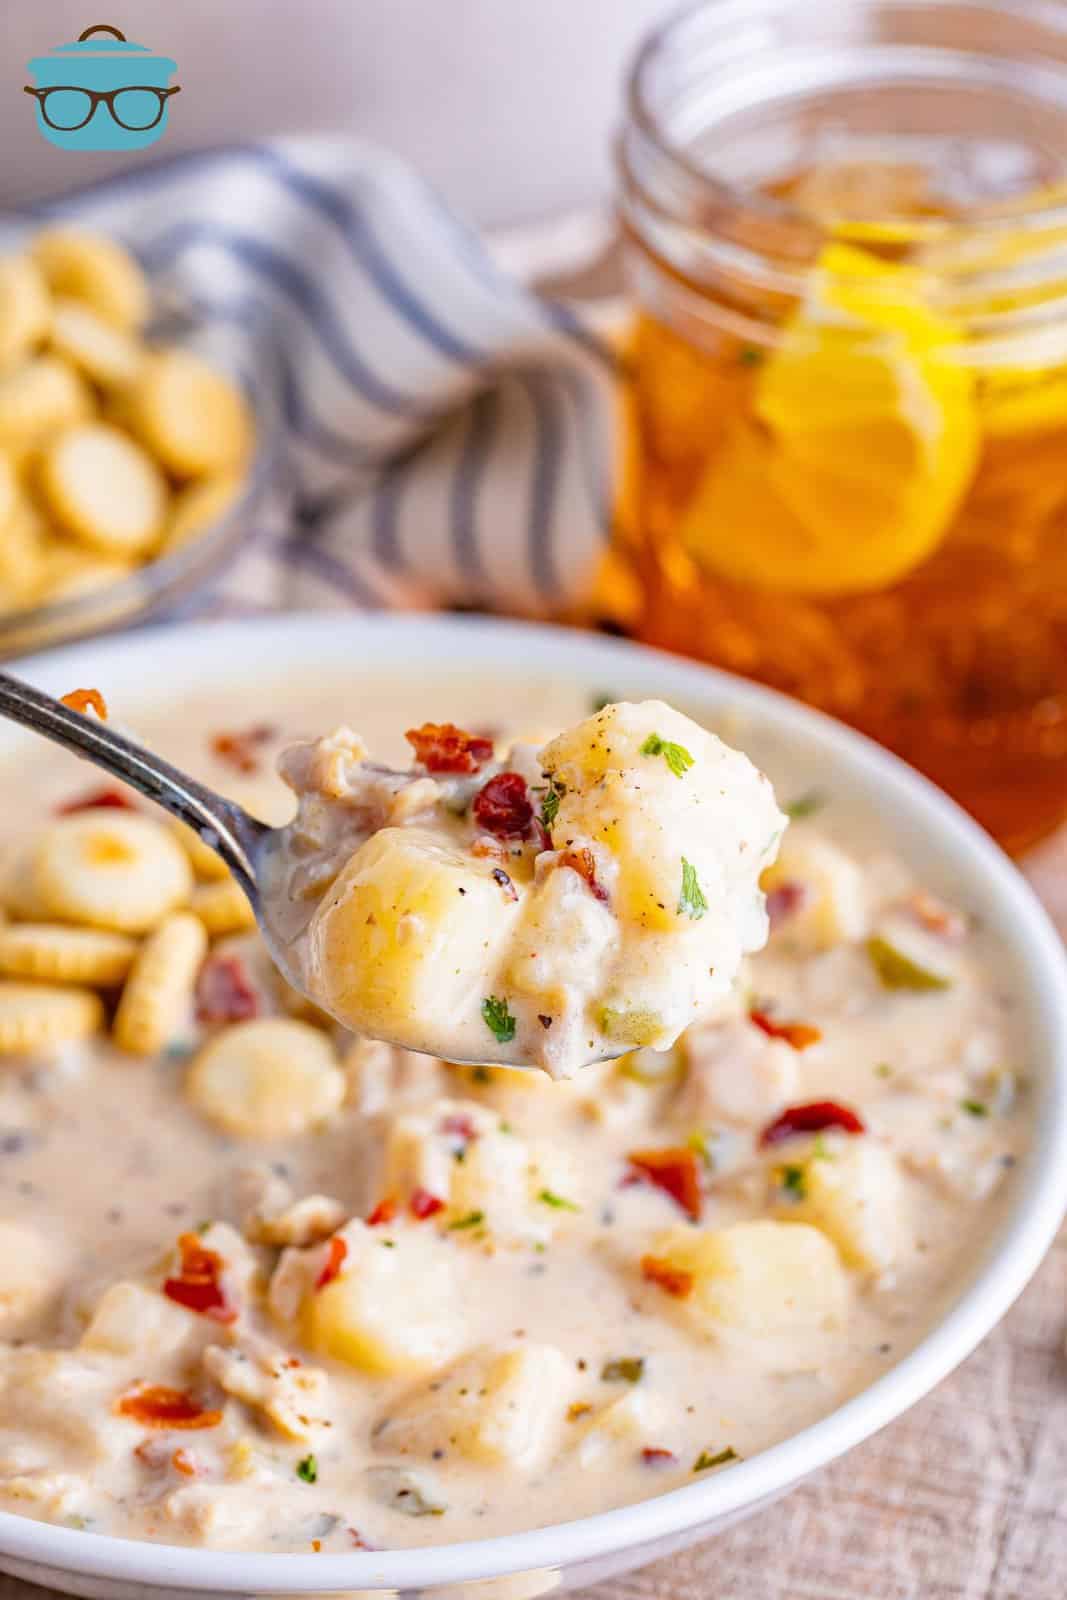 A spoonful of Clam Chowder above the bowl.